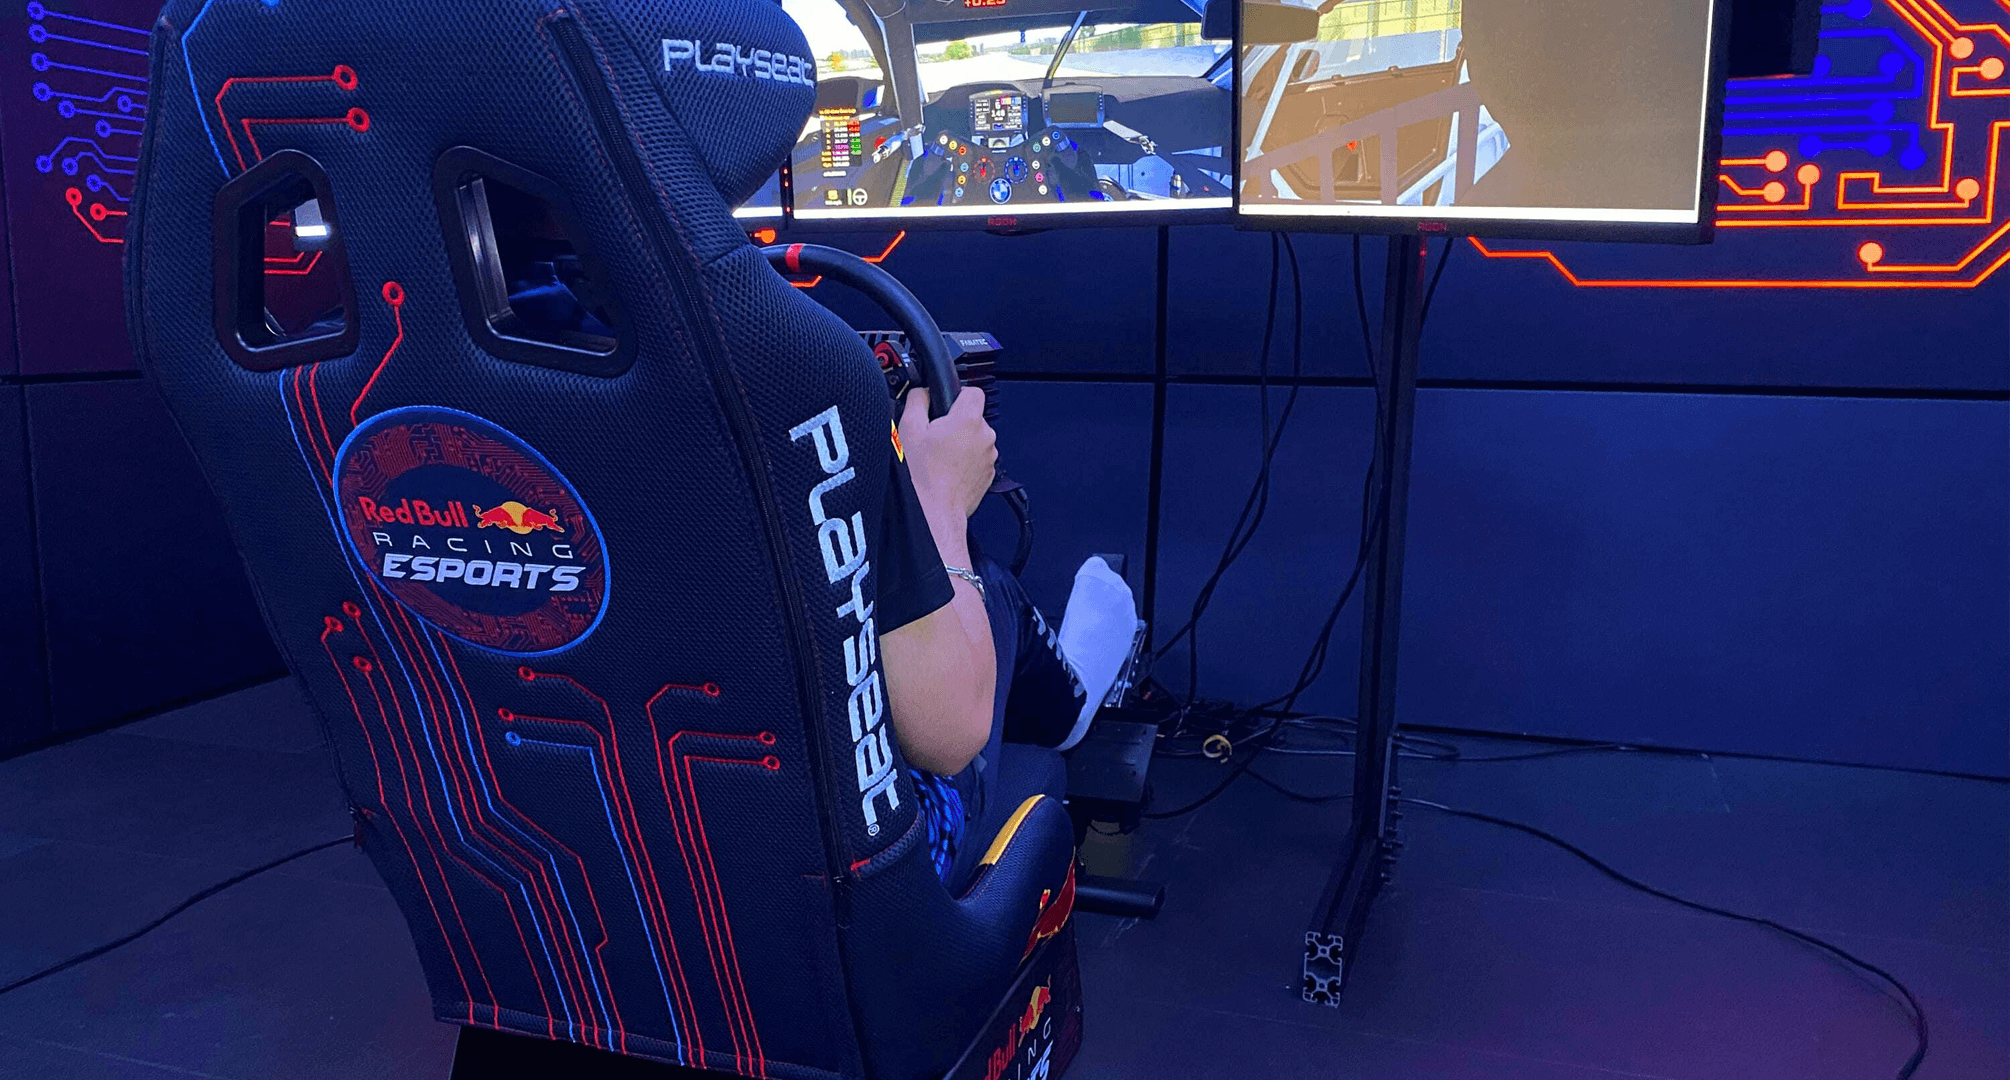 Playseat Evolution Red Bull GRC Gaming Seat, Racing Seat, Patented Foldable  Design, Fully Adjustable for the Perfect Diving Postion, Supports All 3rd  Party Steering Wheel & Pedal Sets, Blue